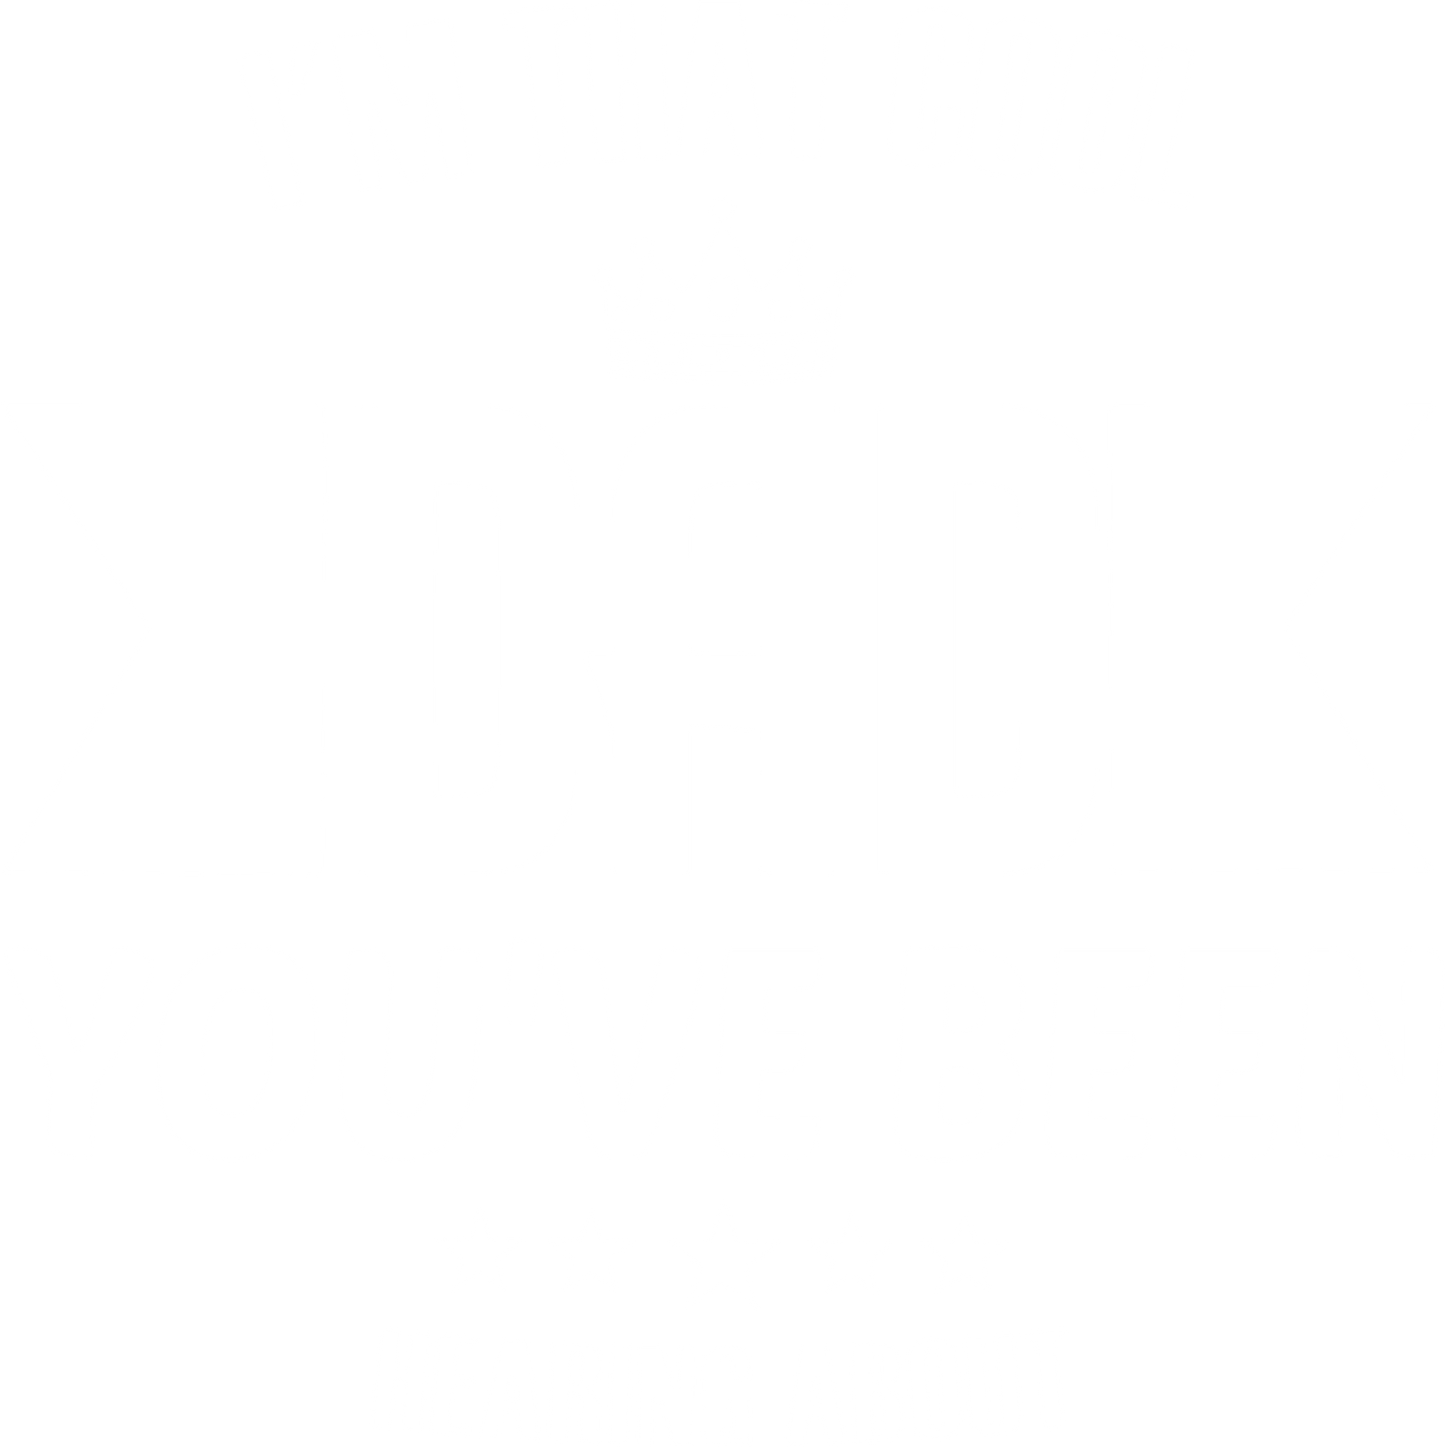 Dad, You have been Cool